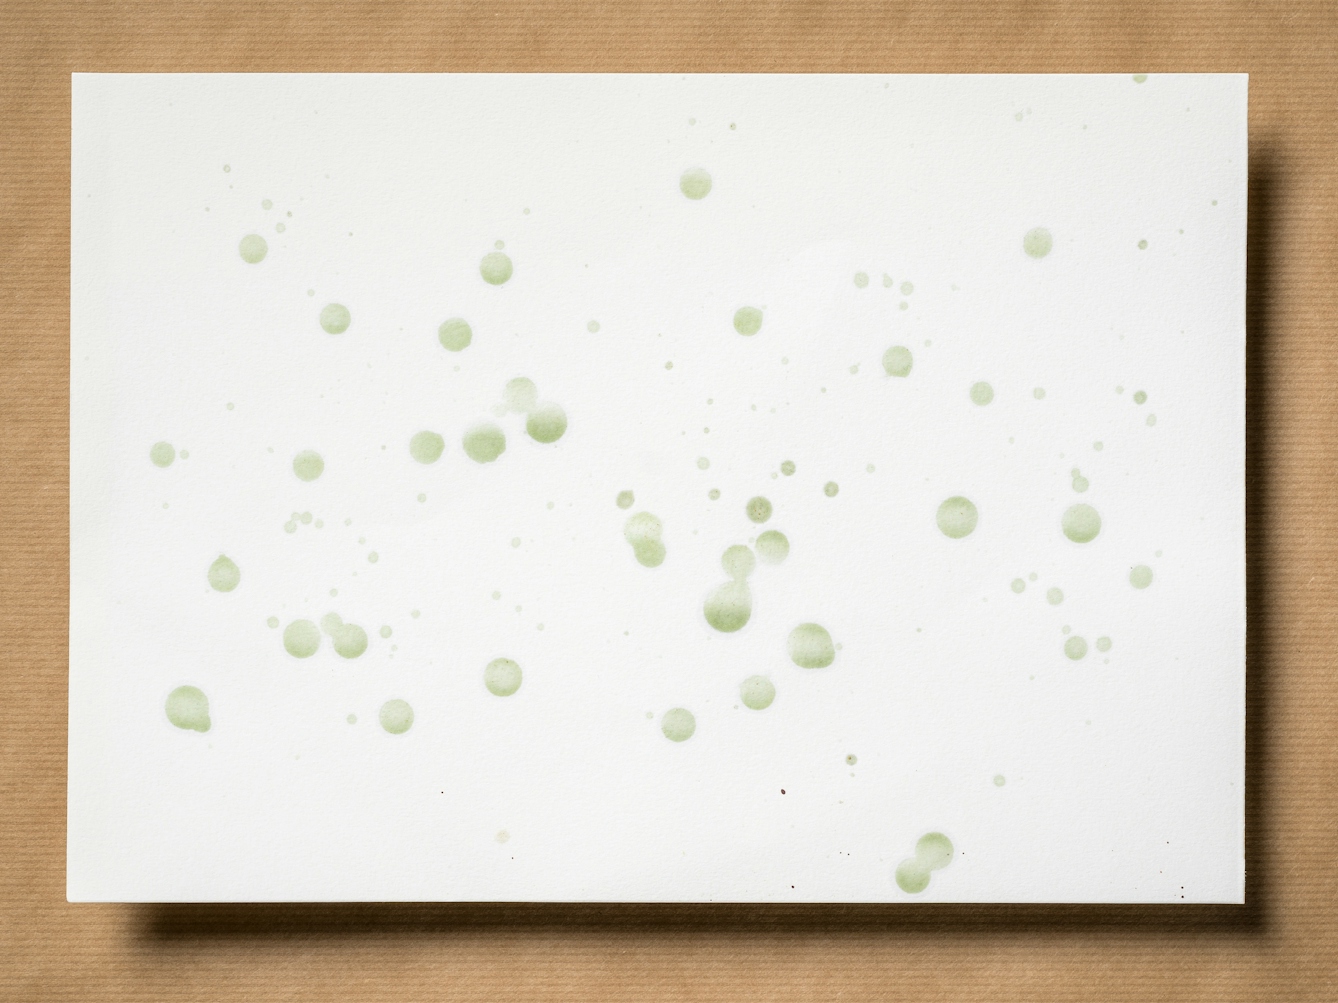 Photograph of an original artwork on watercolour paper. The artwork is resting on a brown parcel paper background. The artwork shows many varying in size droplet spatters made with coloured ink. The ink colours are green. The spatters seem random in distribution.